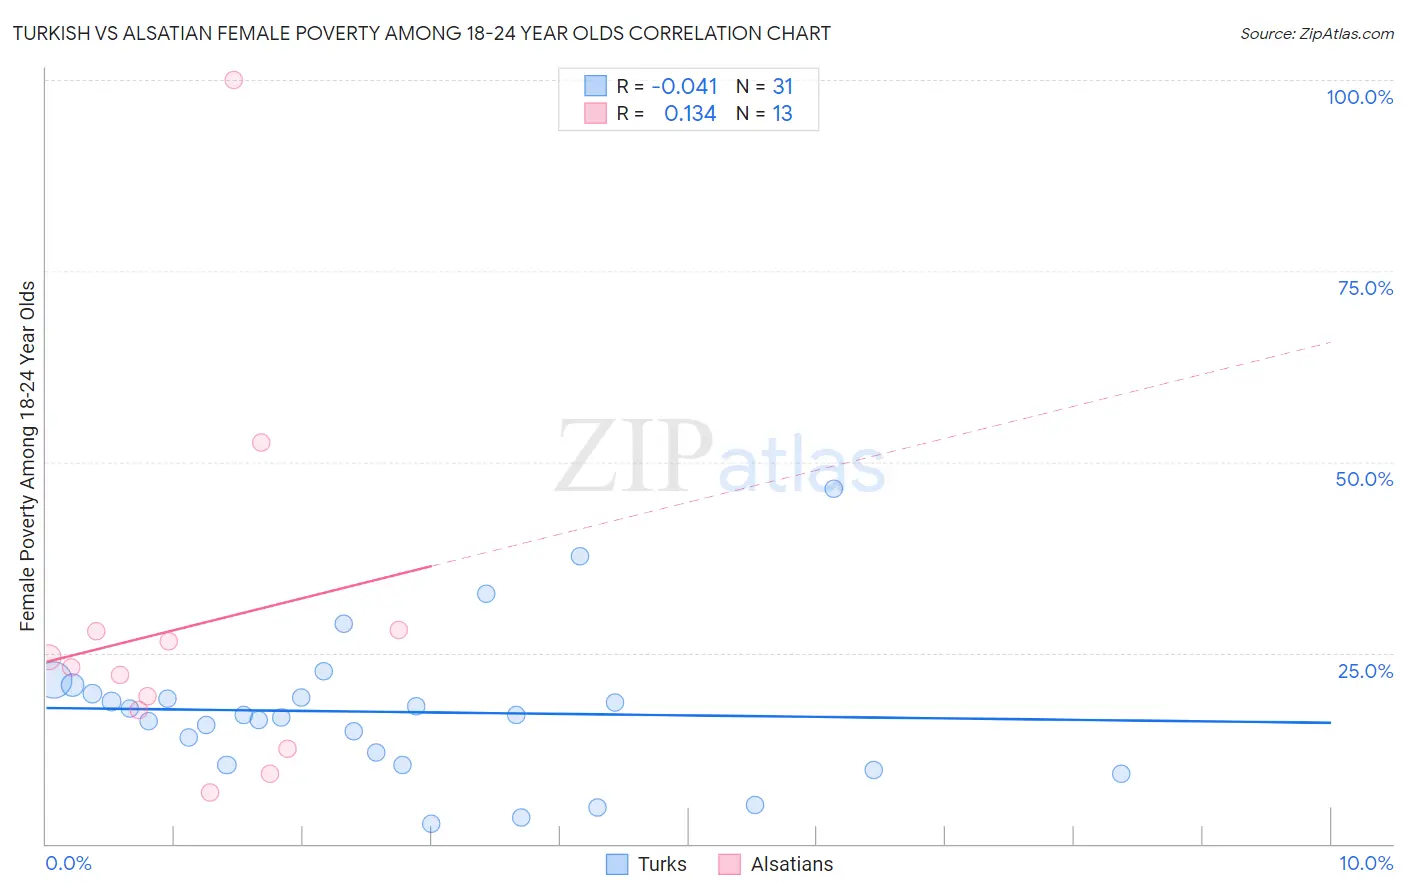 Turkish vs Alsatian Female Poverty Among 18-24 Year Olds